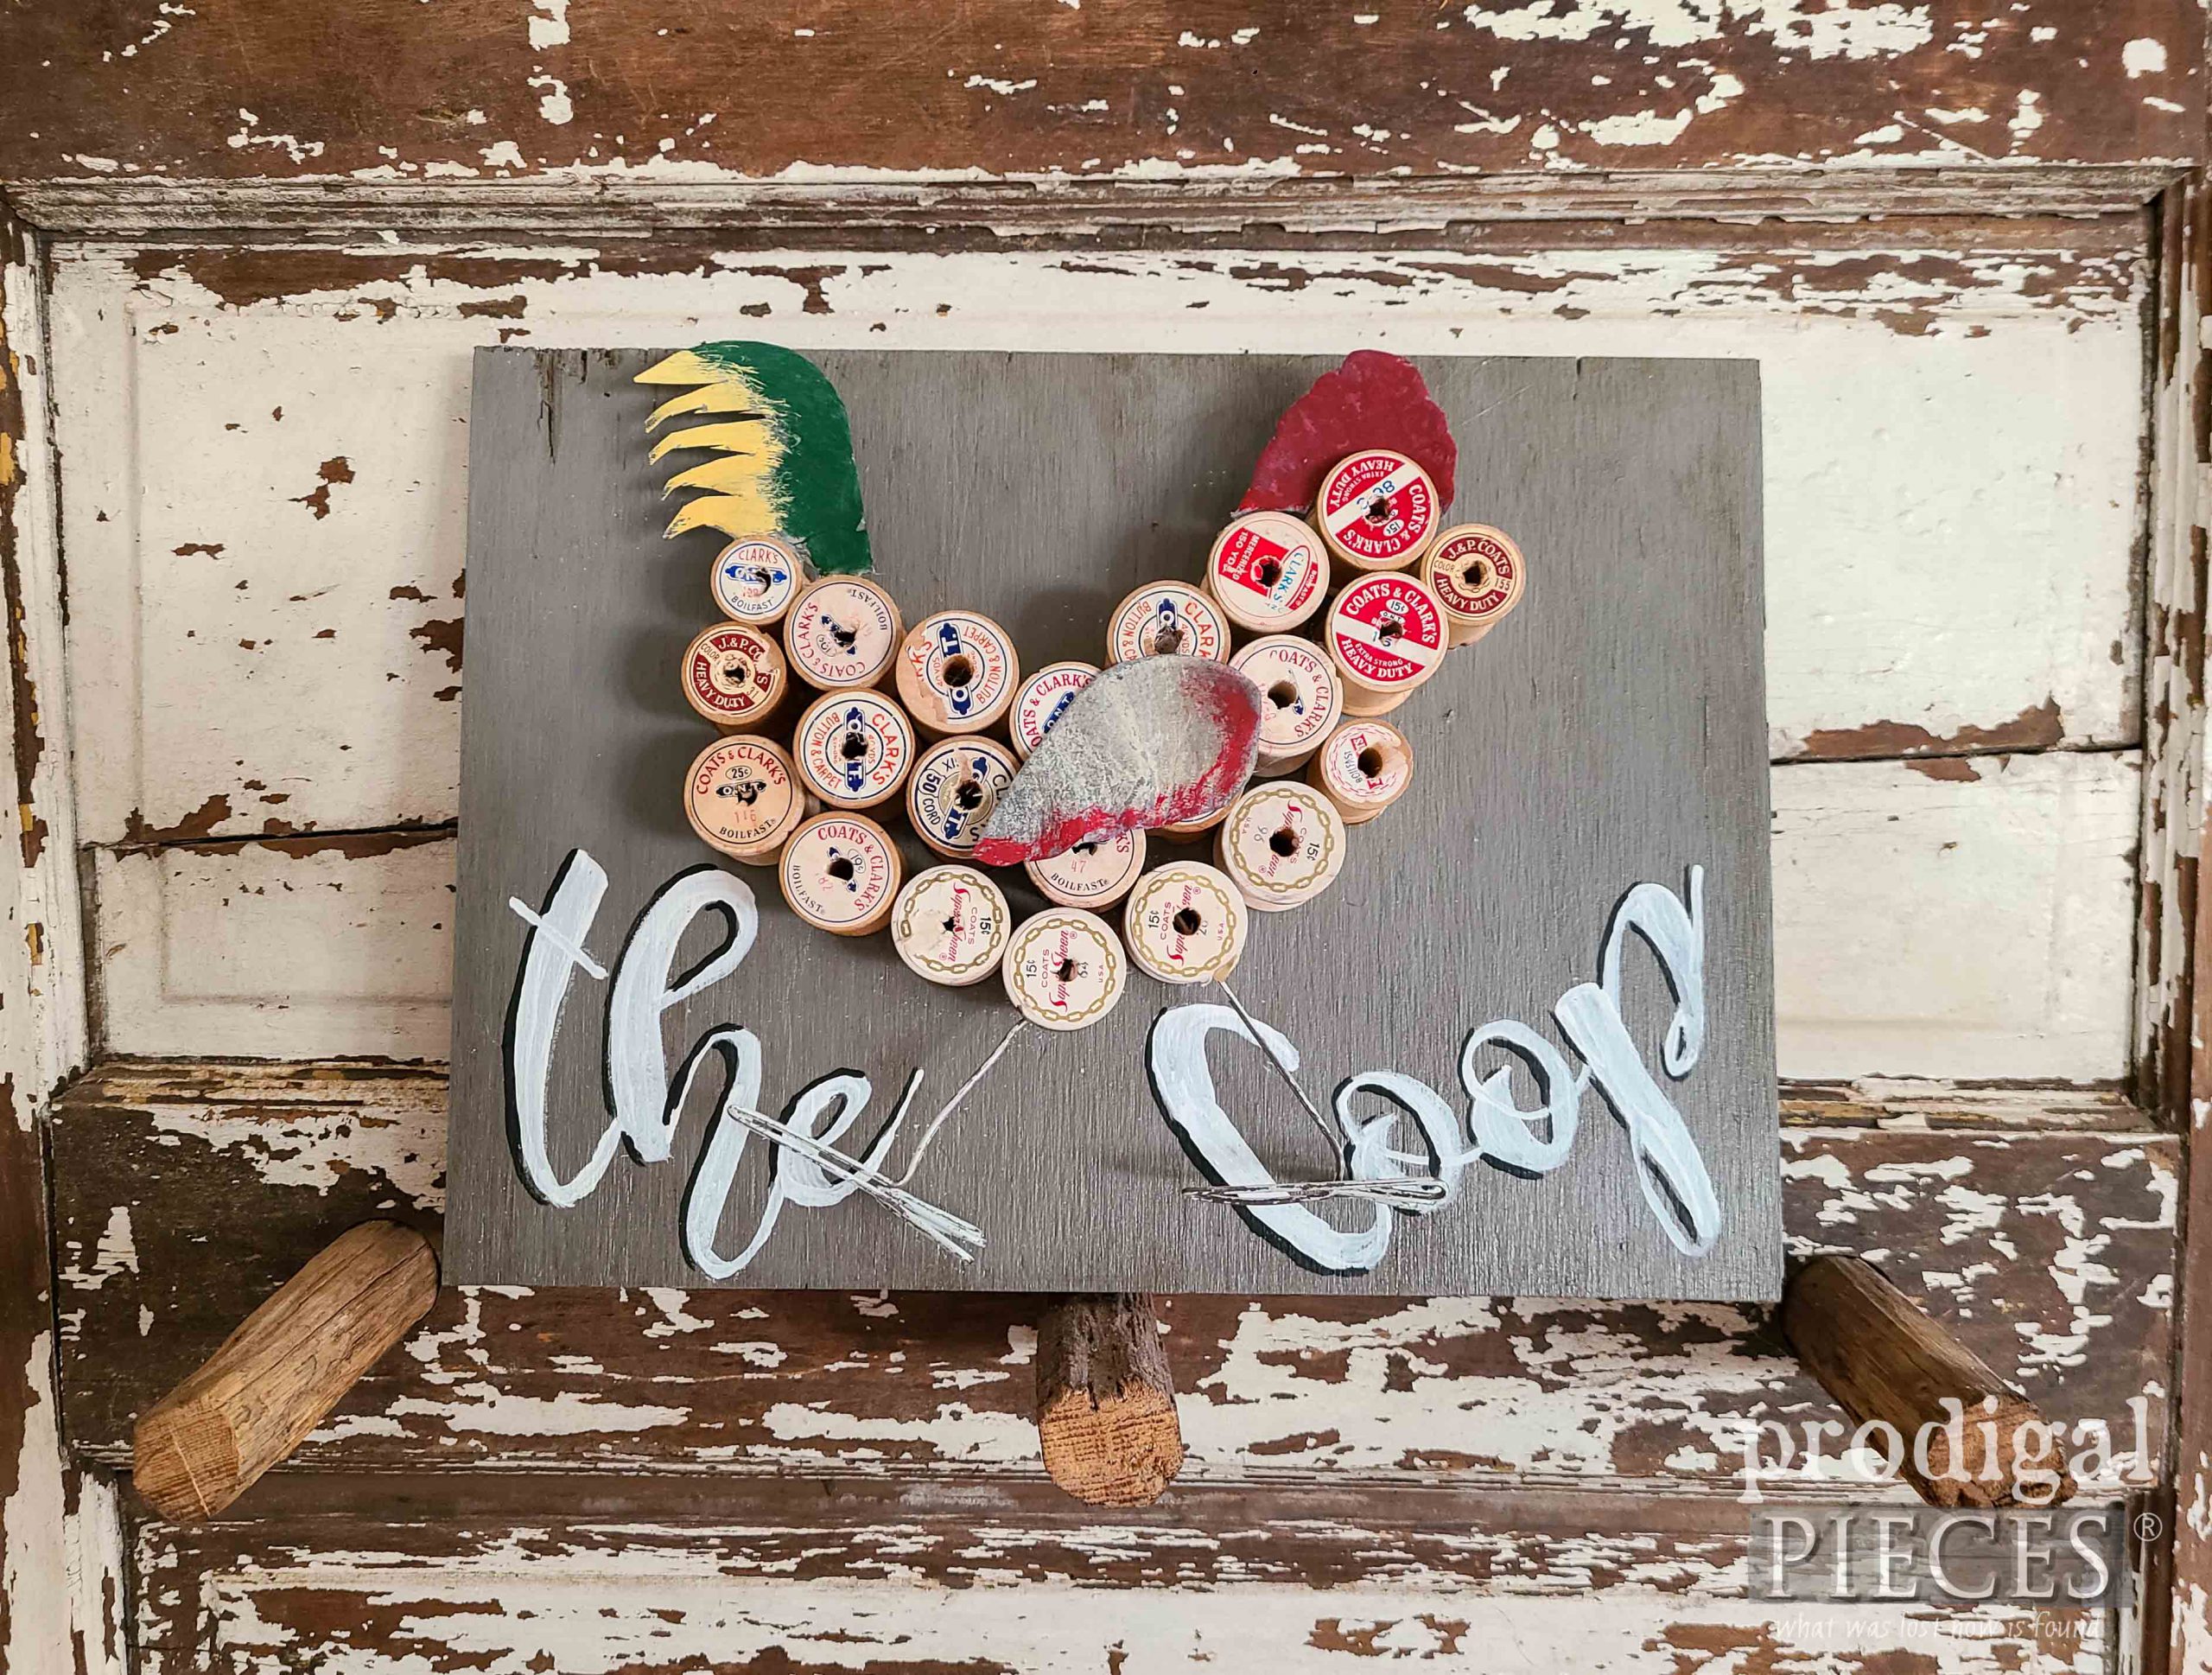 The Coop Chicken Art from Upcycled Wooden Thread Spool Collection by Larissa of Prodigal Pieces | prodigalpieces.com #prodigalpieces #farmhouse #home #diy #chicken